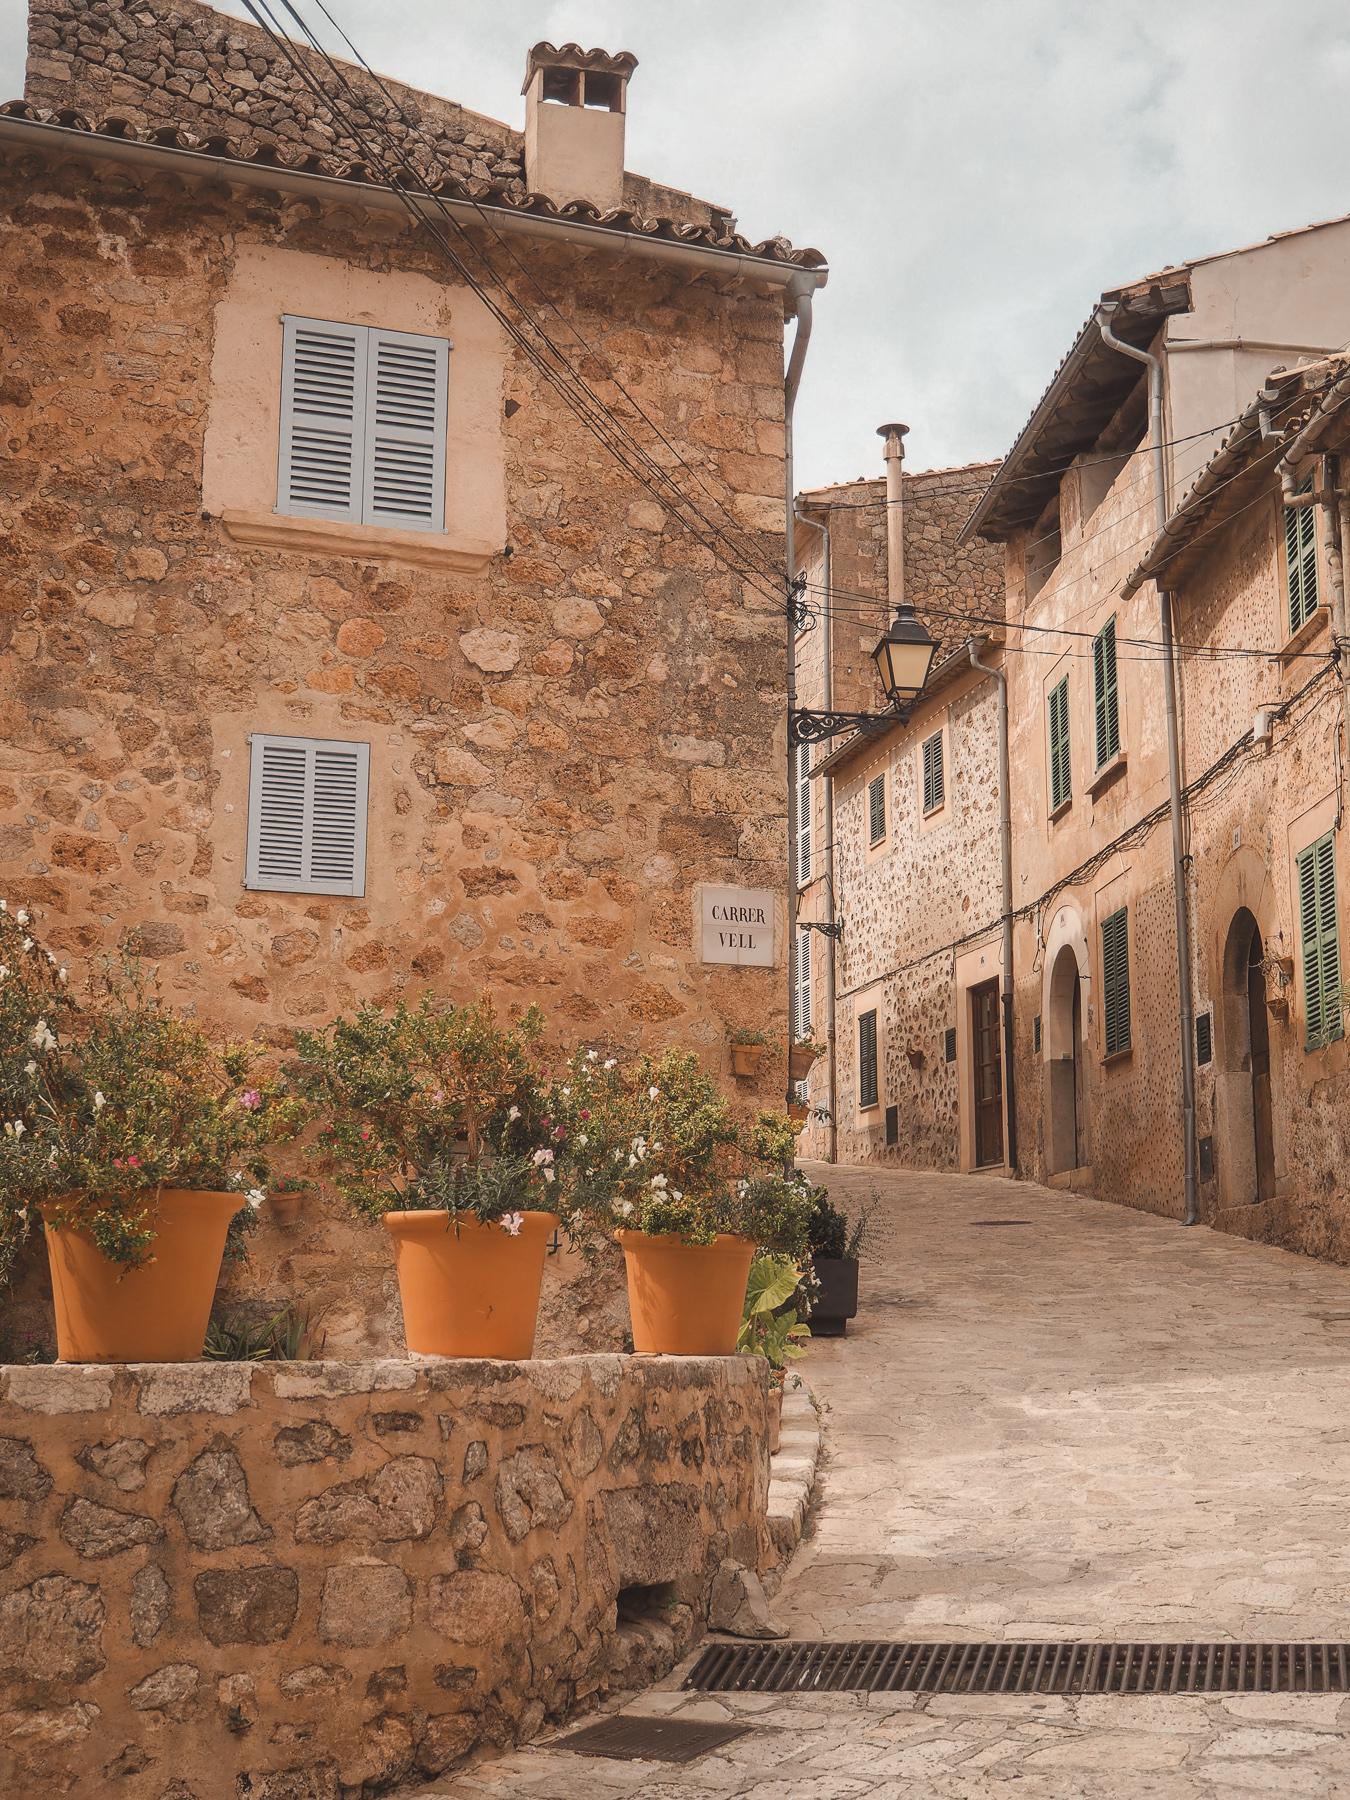 The Most Beautiful Towns In Mallorca | lifestyletraveler.co | IG: @lifestyletraveler.co